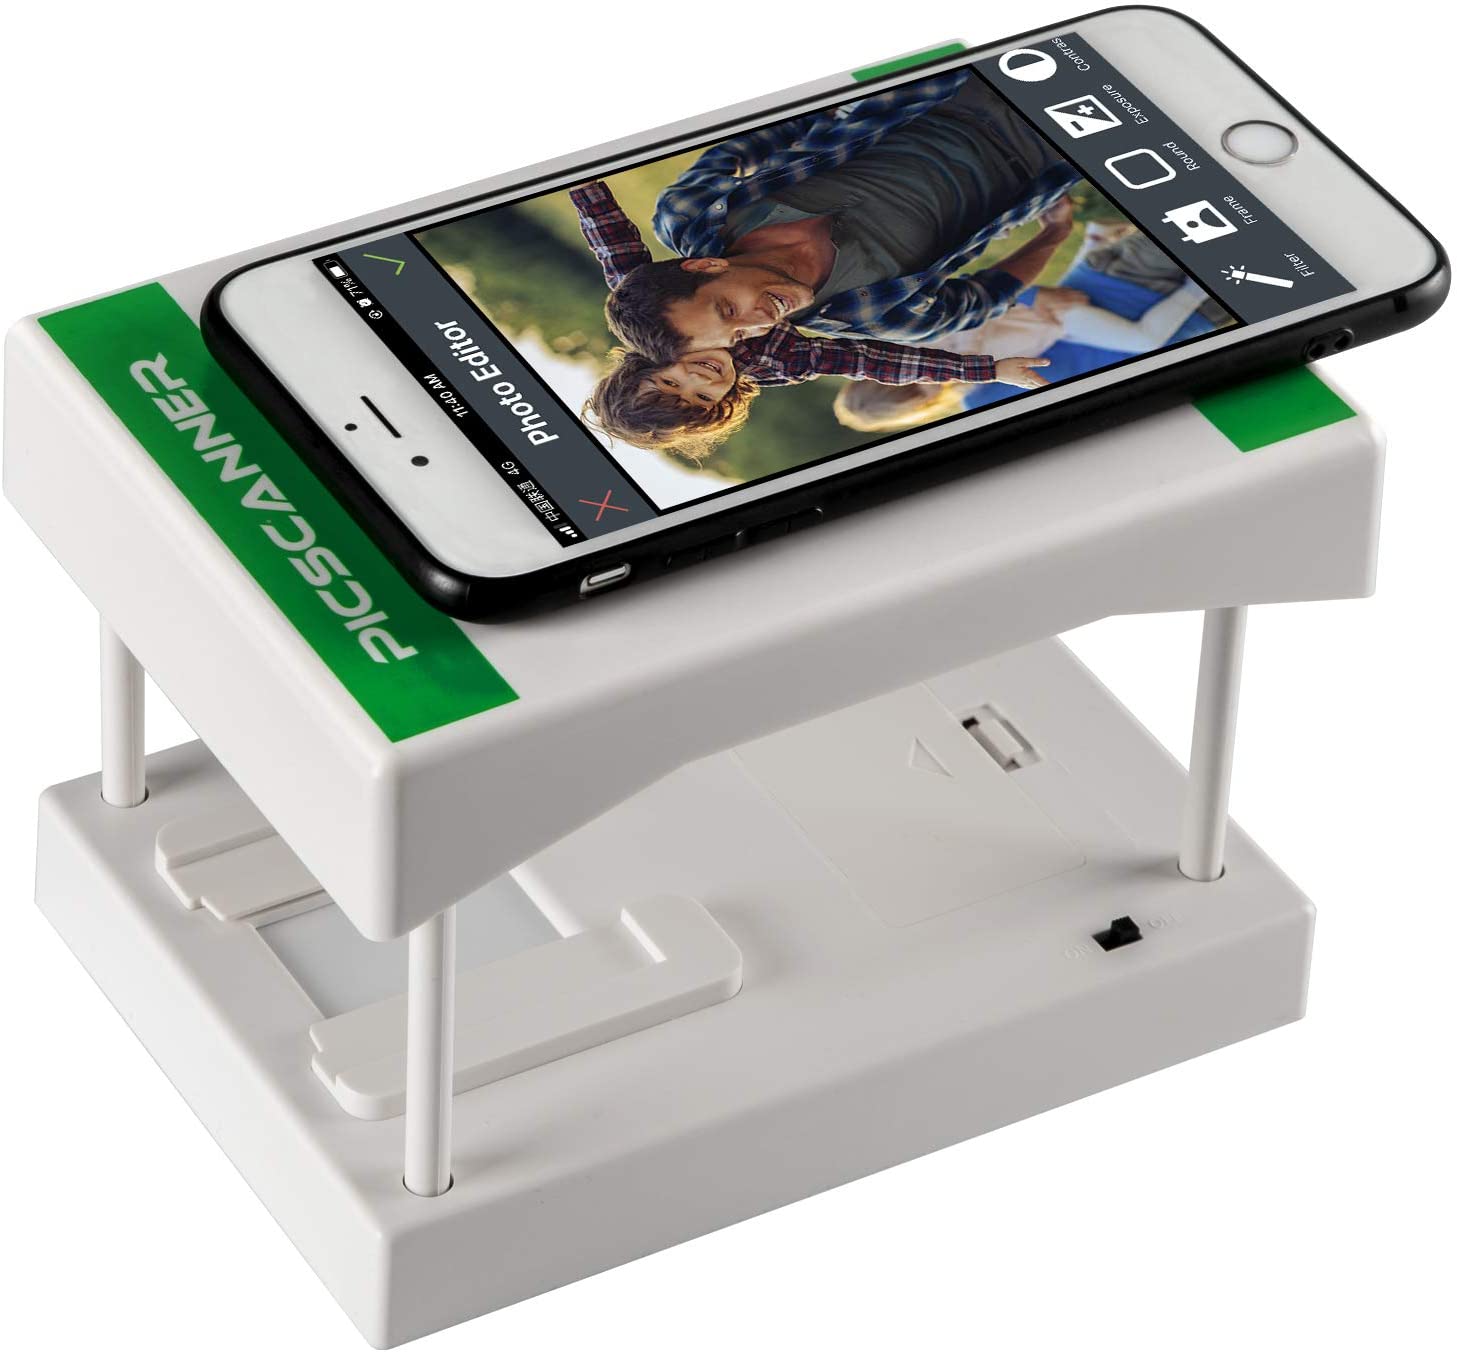 Mobile Film Scanner Converts 35mm Slides & Negatives into Digital Photos with Your Smartphone Camera